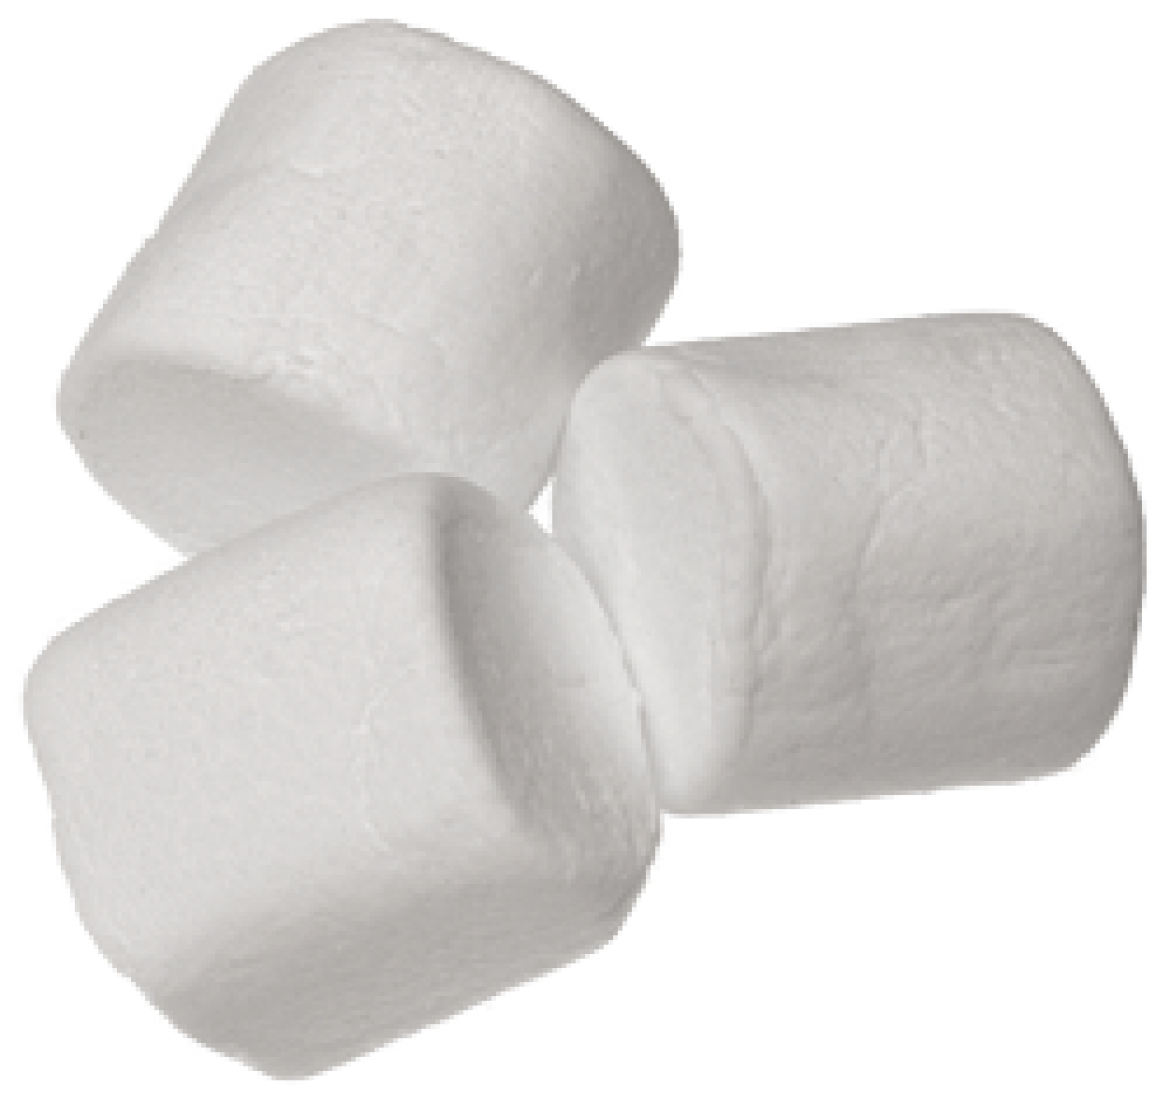 Marshmallow PNG Image High Quality PNG Image